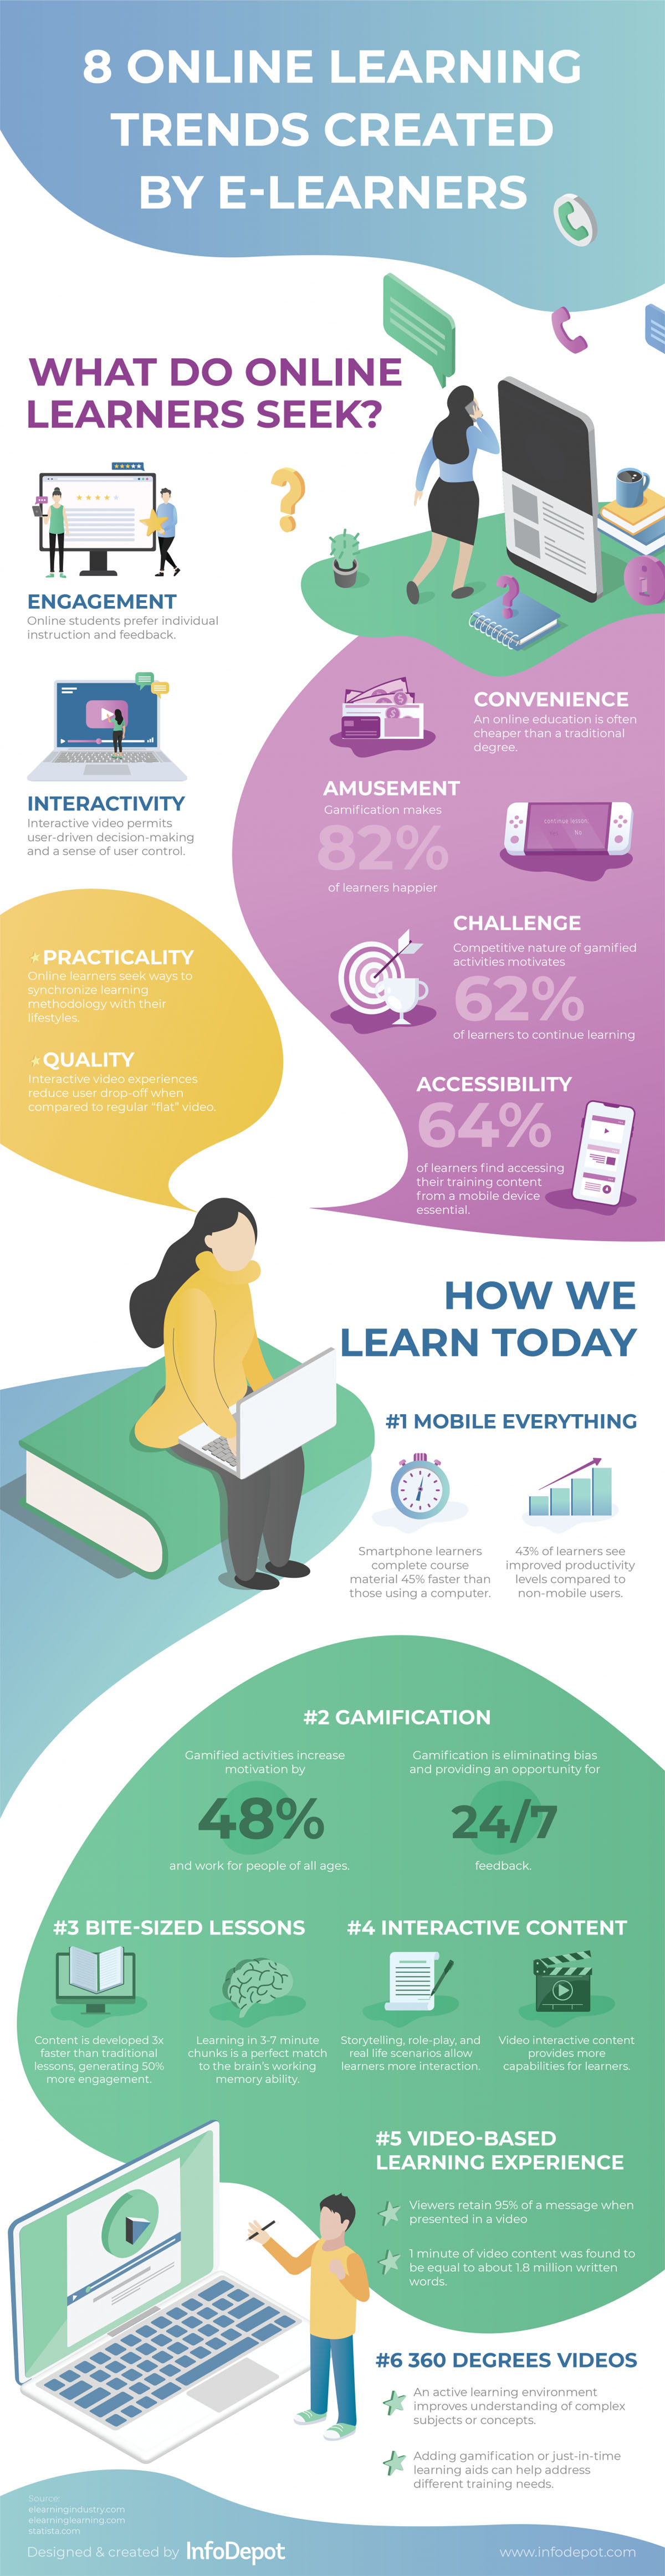 online learning trends.